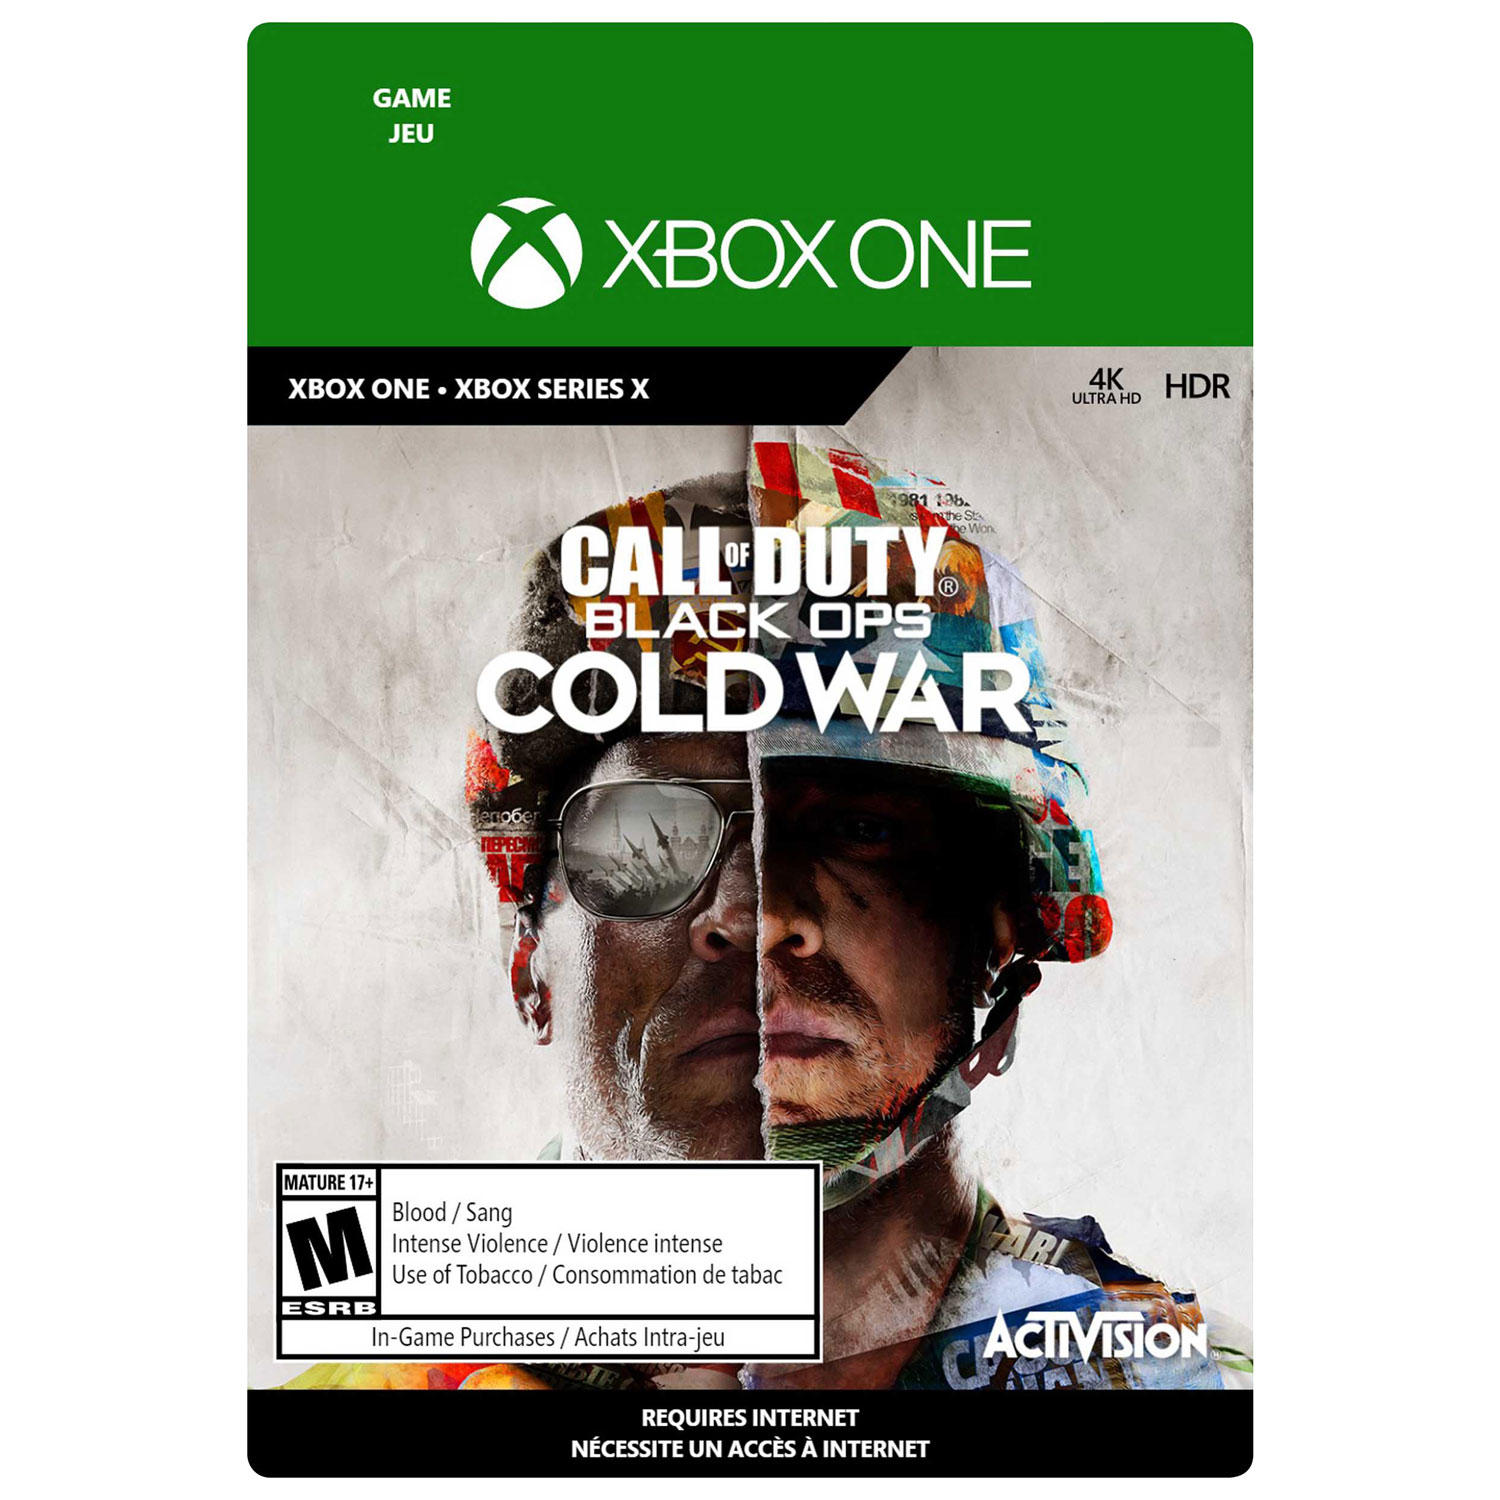 Call of Duty: Black Ops Cold War (Xbox One) - Digital Download